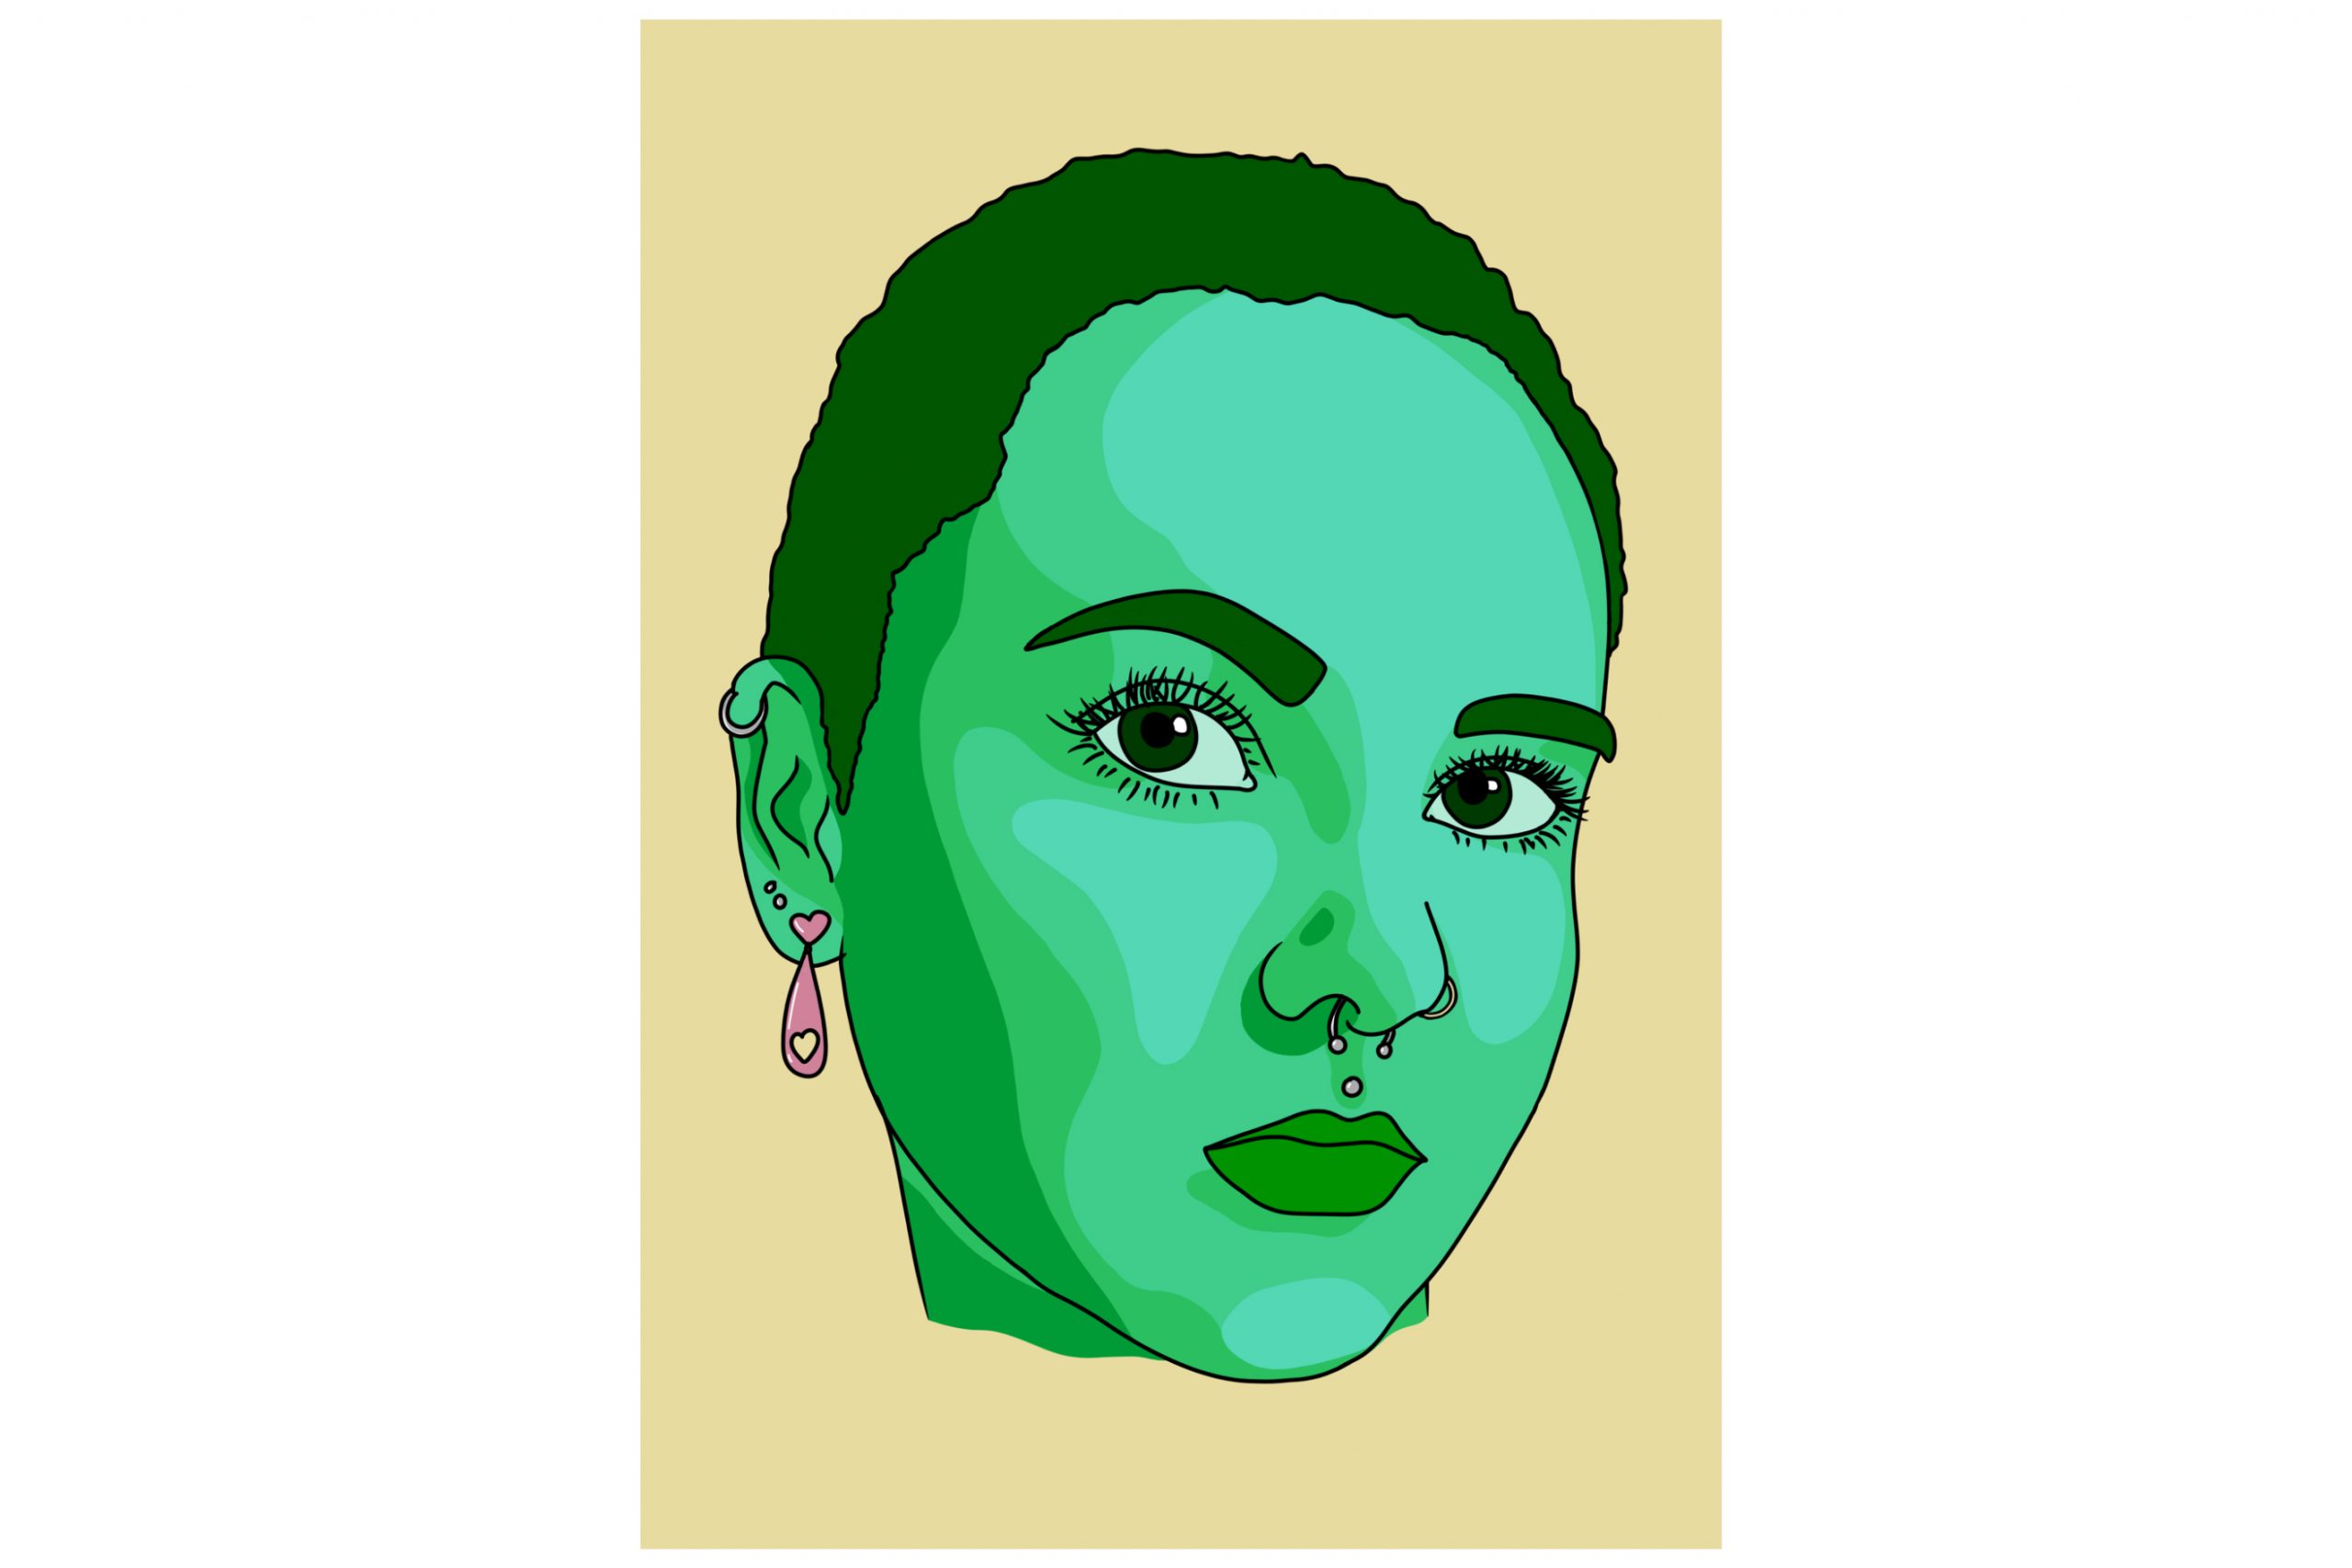 A self portrait of the artist using mostly green hues, placed upon a light yellow background.